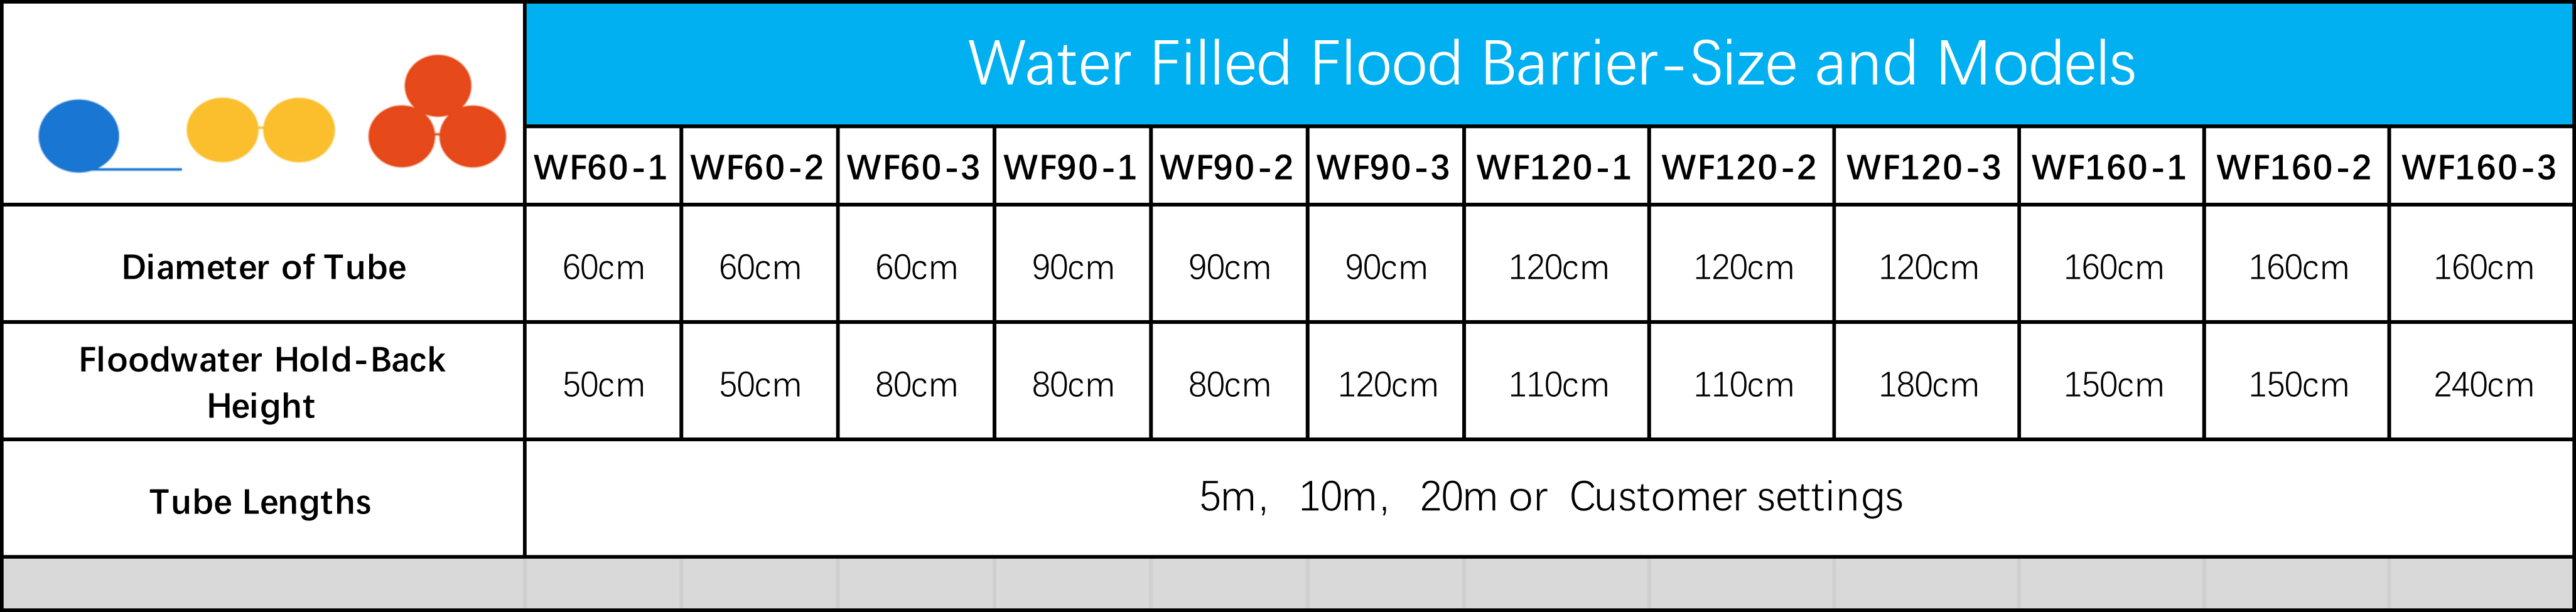 Inflatable Water Filled Flood Barrier sizes